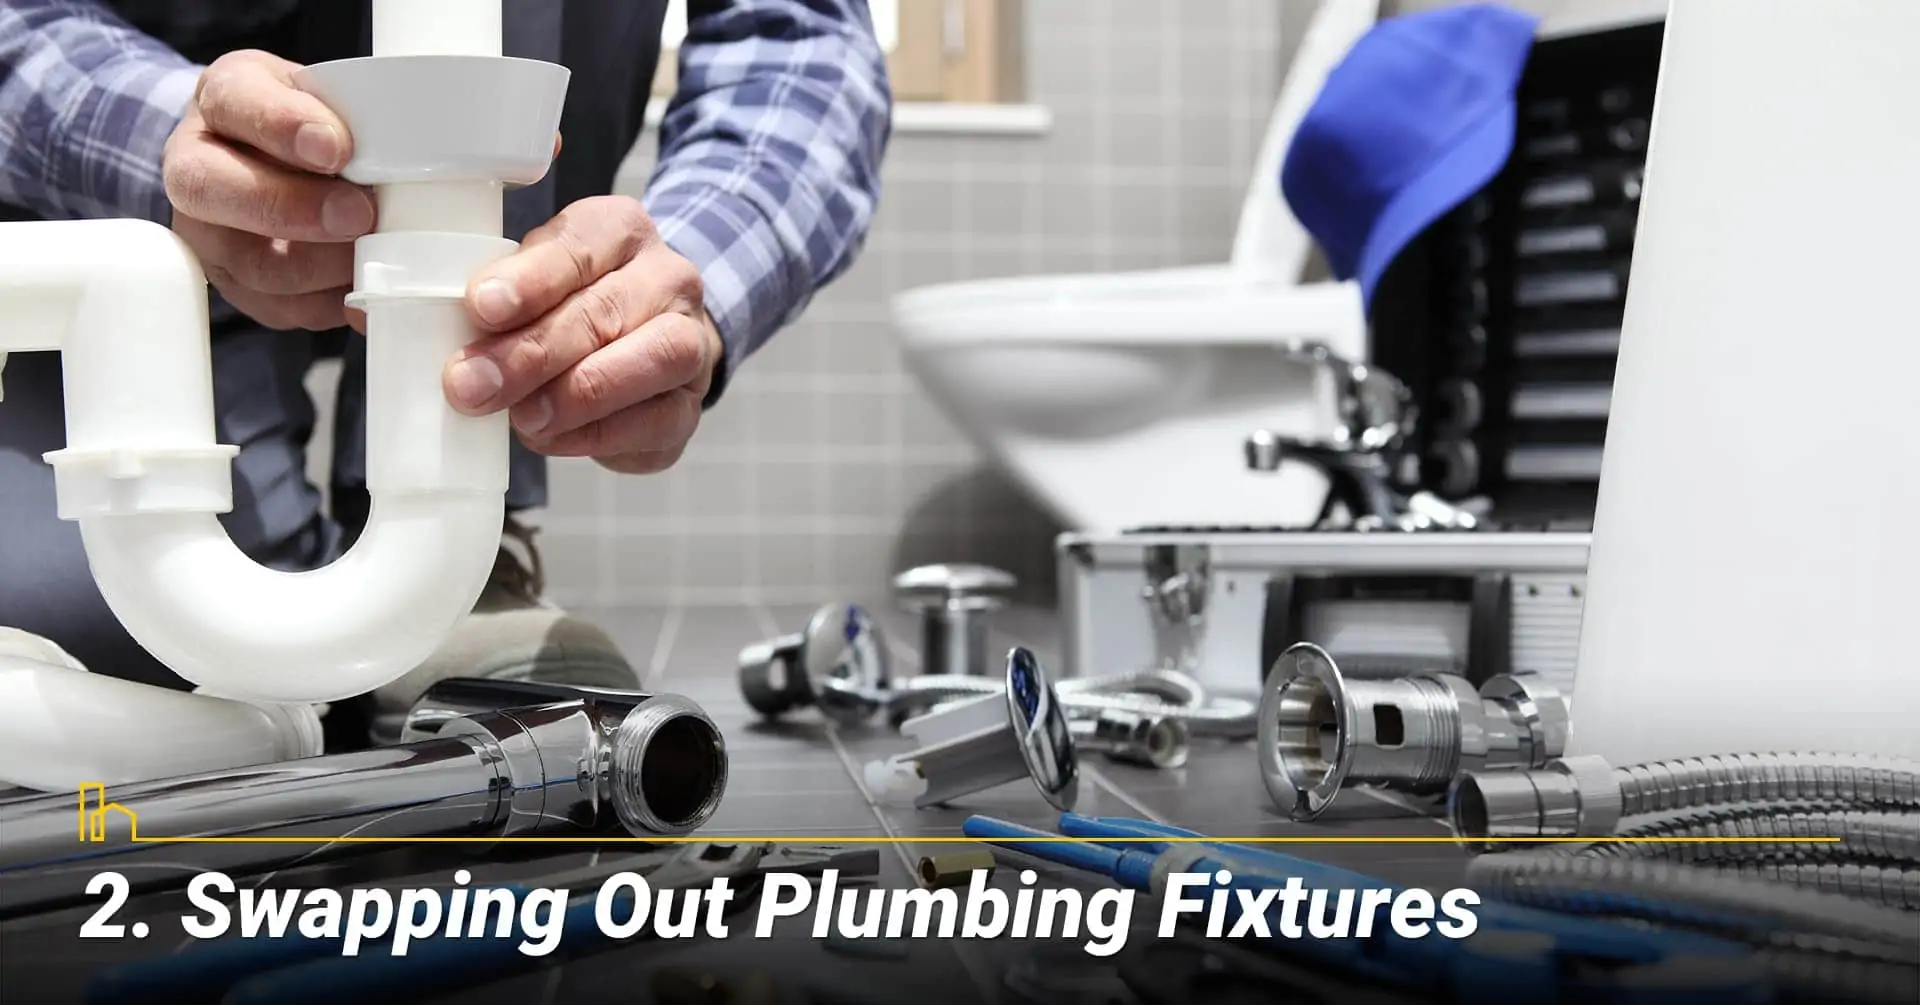 Swapping Out Plumbing Fixtures, replace old plumbing fixtures